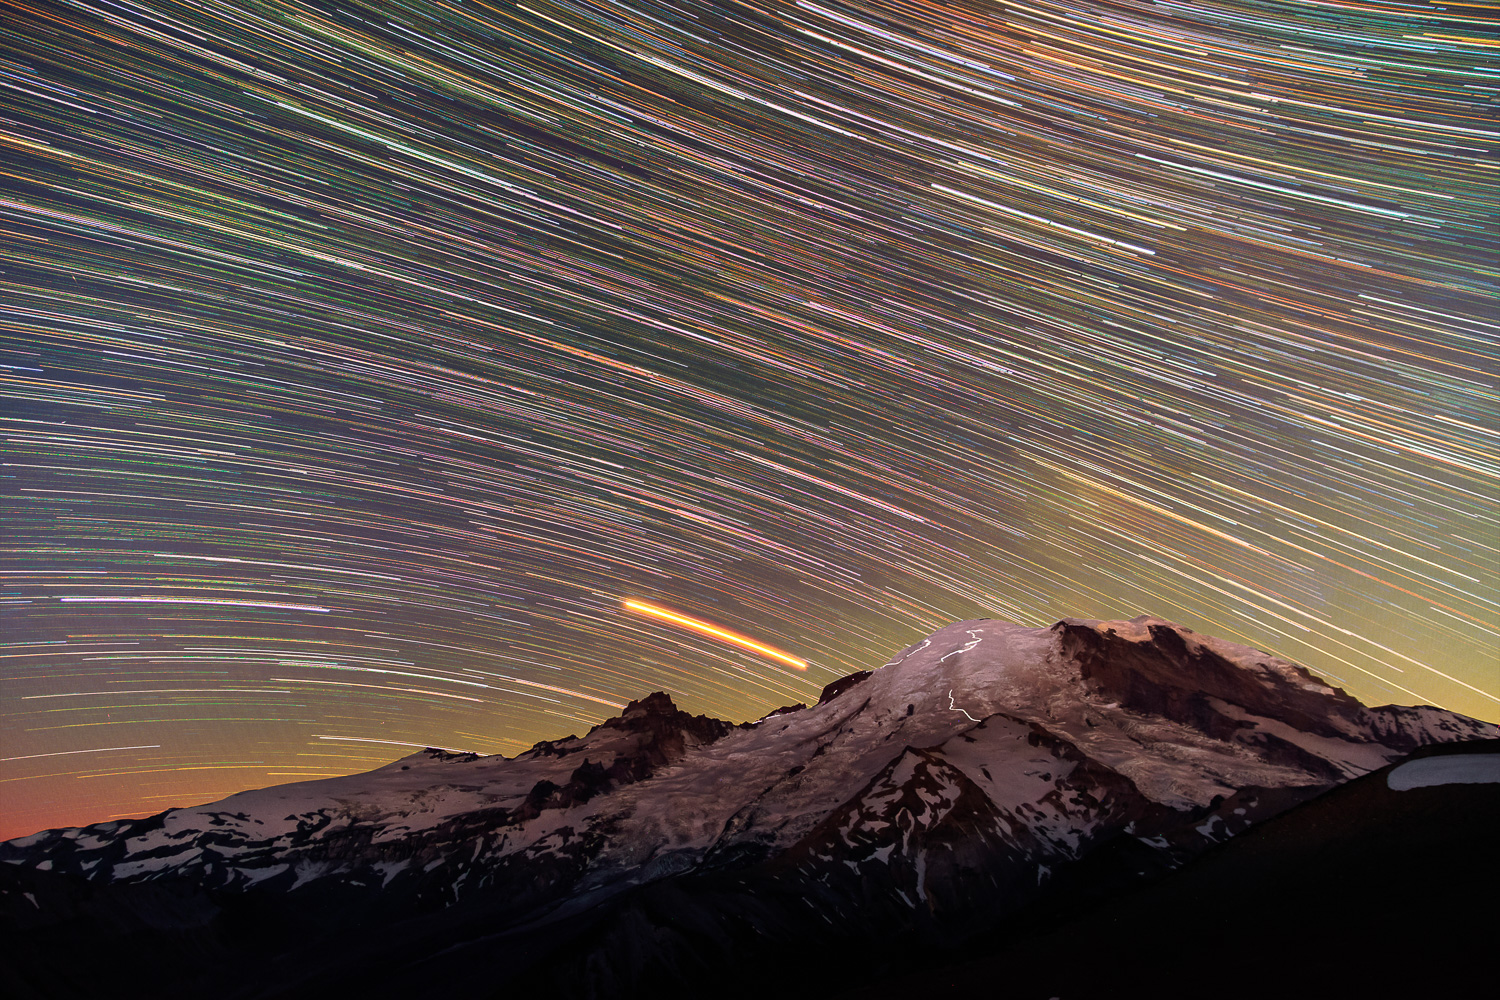  Climbers on the Dissapointment Cleaver and Emmons-Winthrop Routes are visible in this 2 hour star trail exposure. 